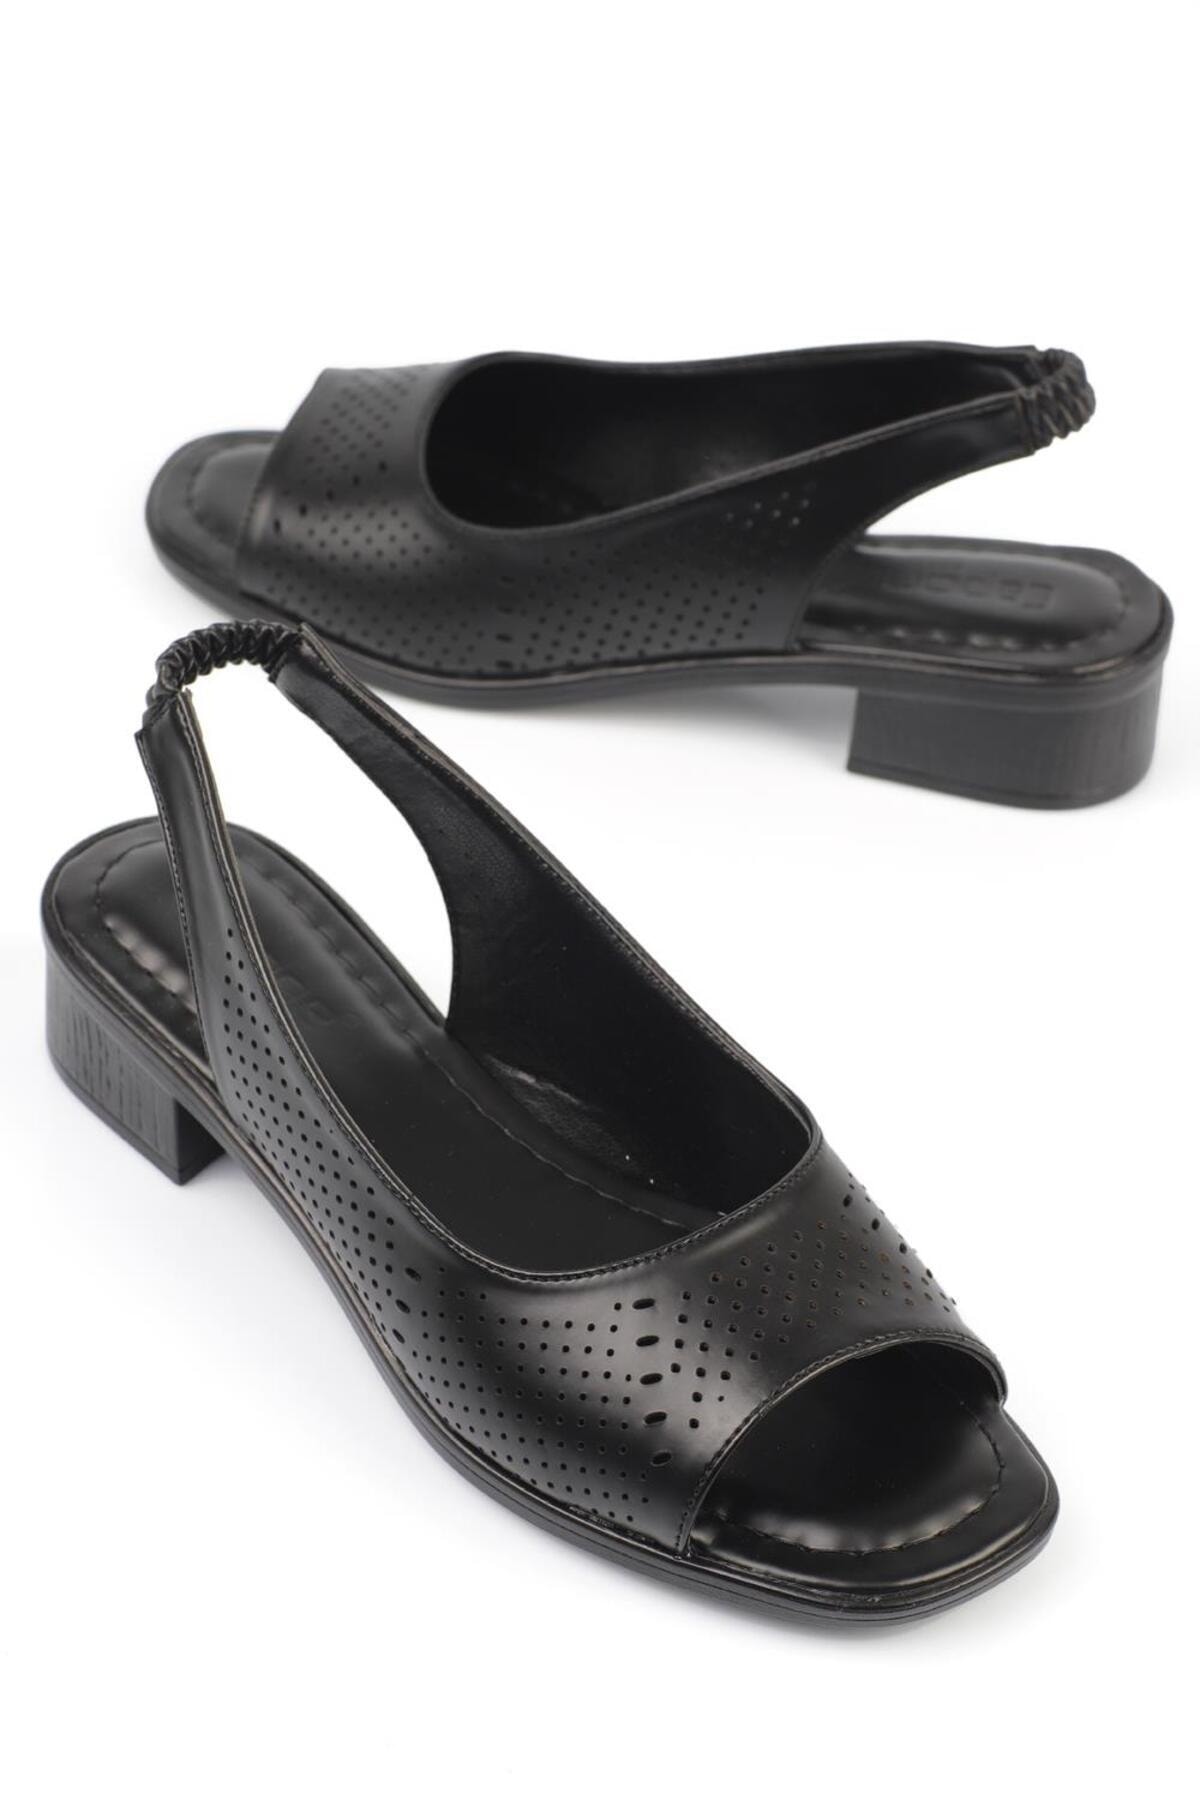 Capone Outfitters Capone Open Front Black Women's Heeled Shoes